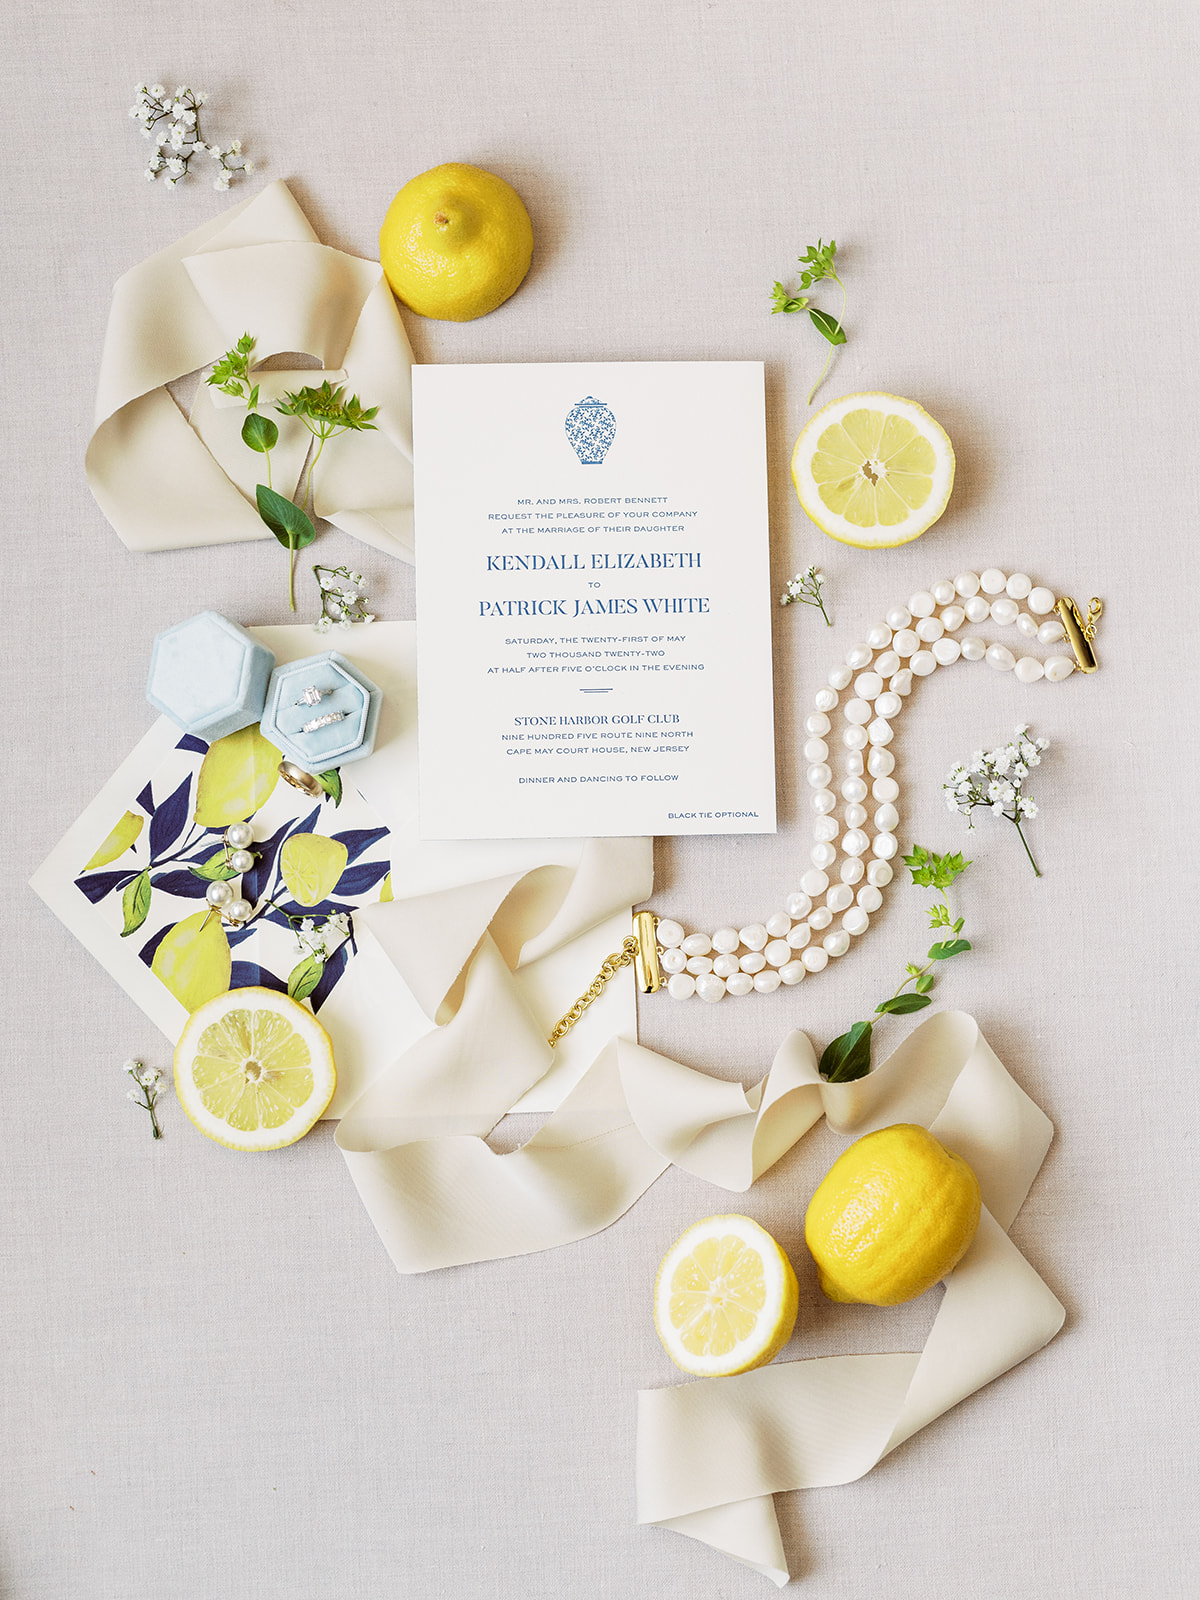 wedding invitation with lemon and pearl accents for Bright Summer Stone Harbor Golf Club Wedding in Yellow and Blue